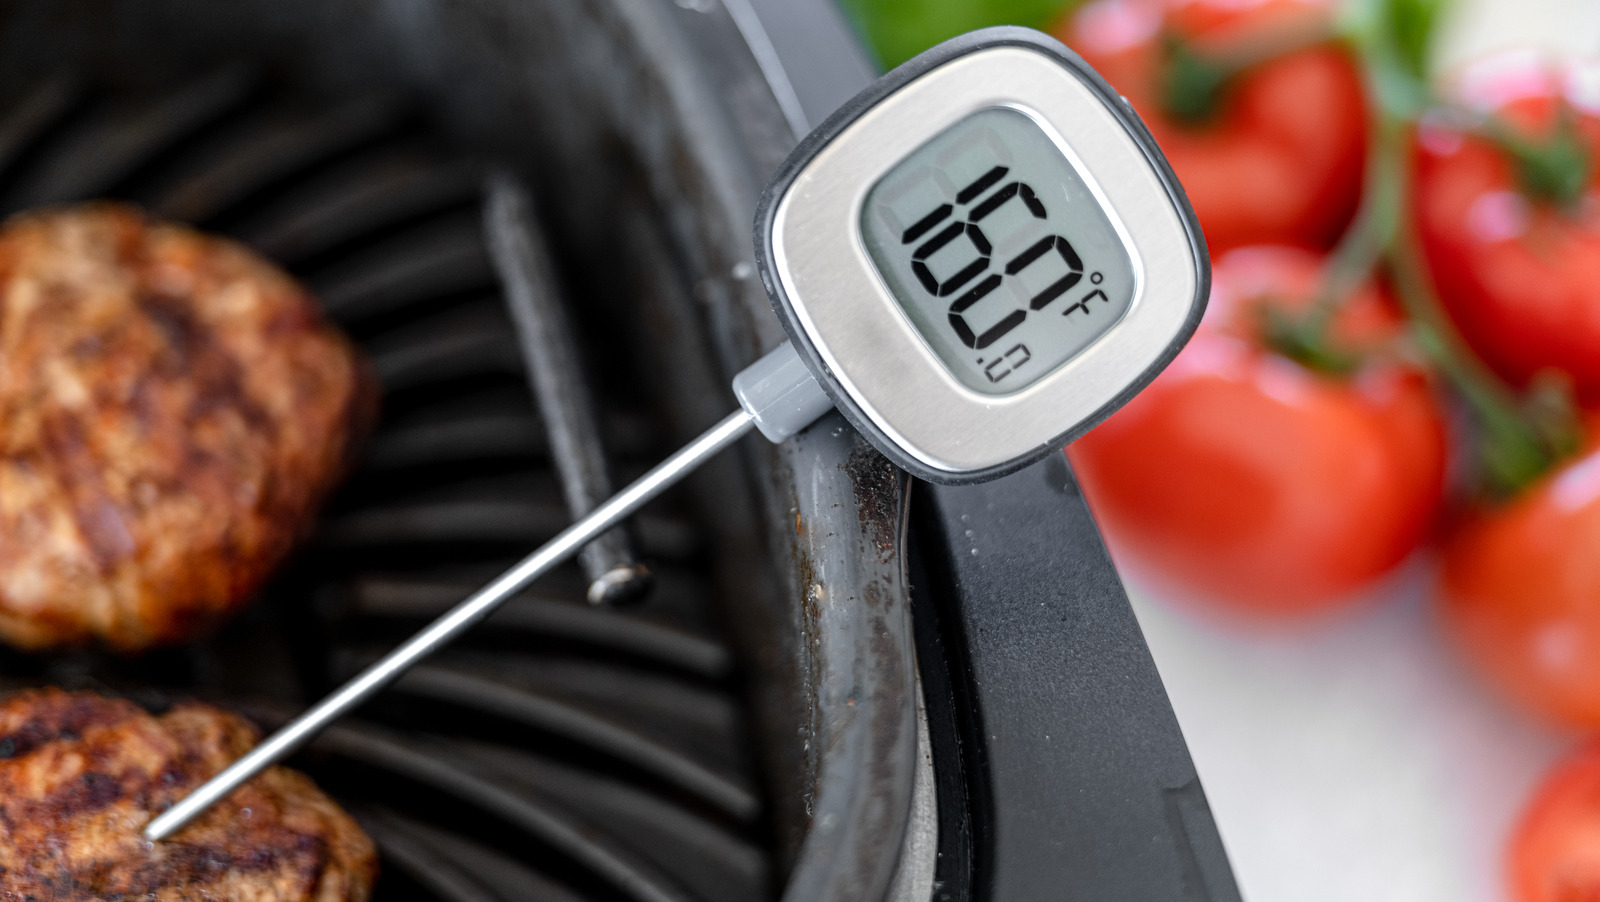 https://www.foodrepublic.com/img/gallery/how-to-calibrate-your-food-thermometer/l-intro-1694717990.jpg